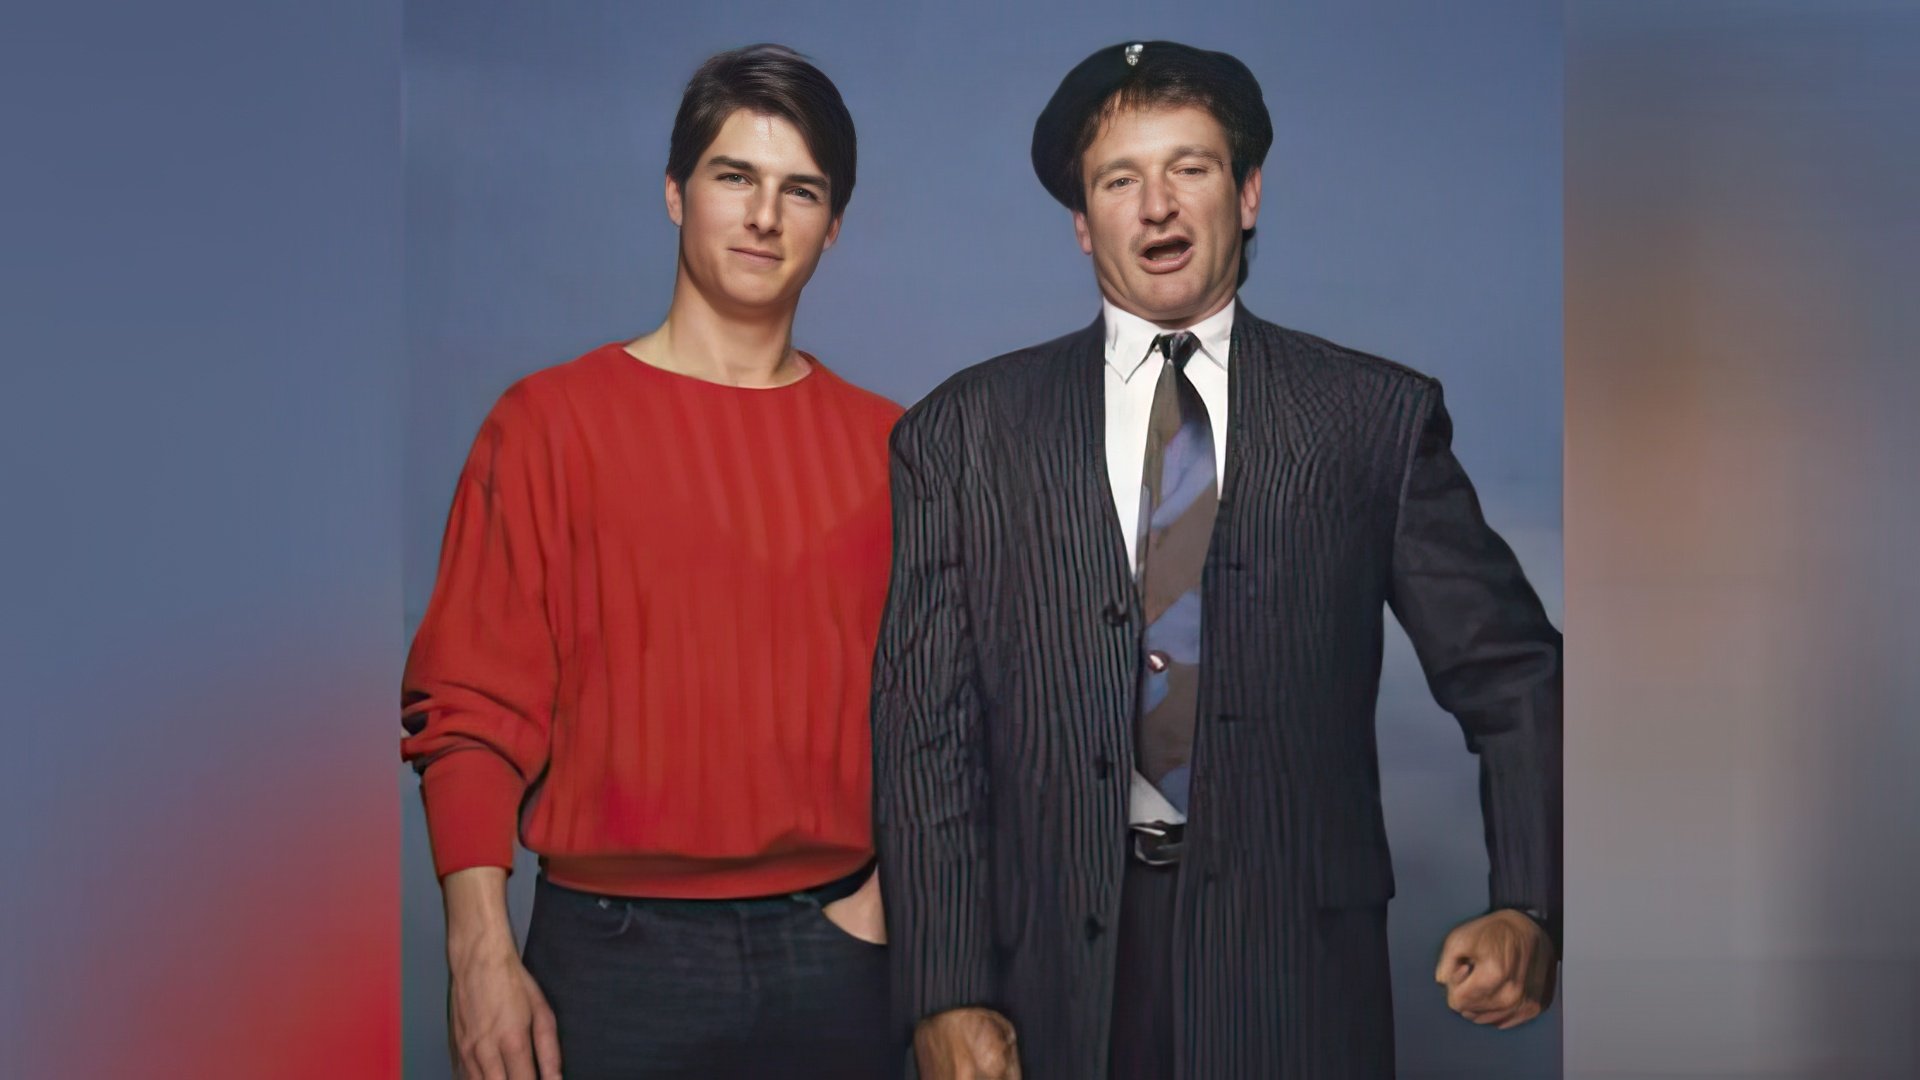  Tom Cruise and Robin Williams